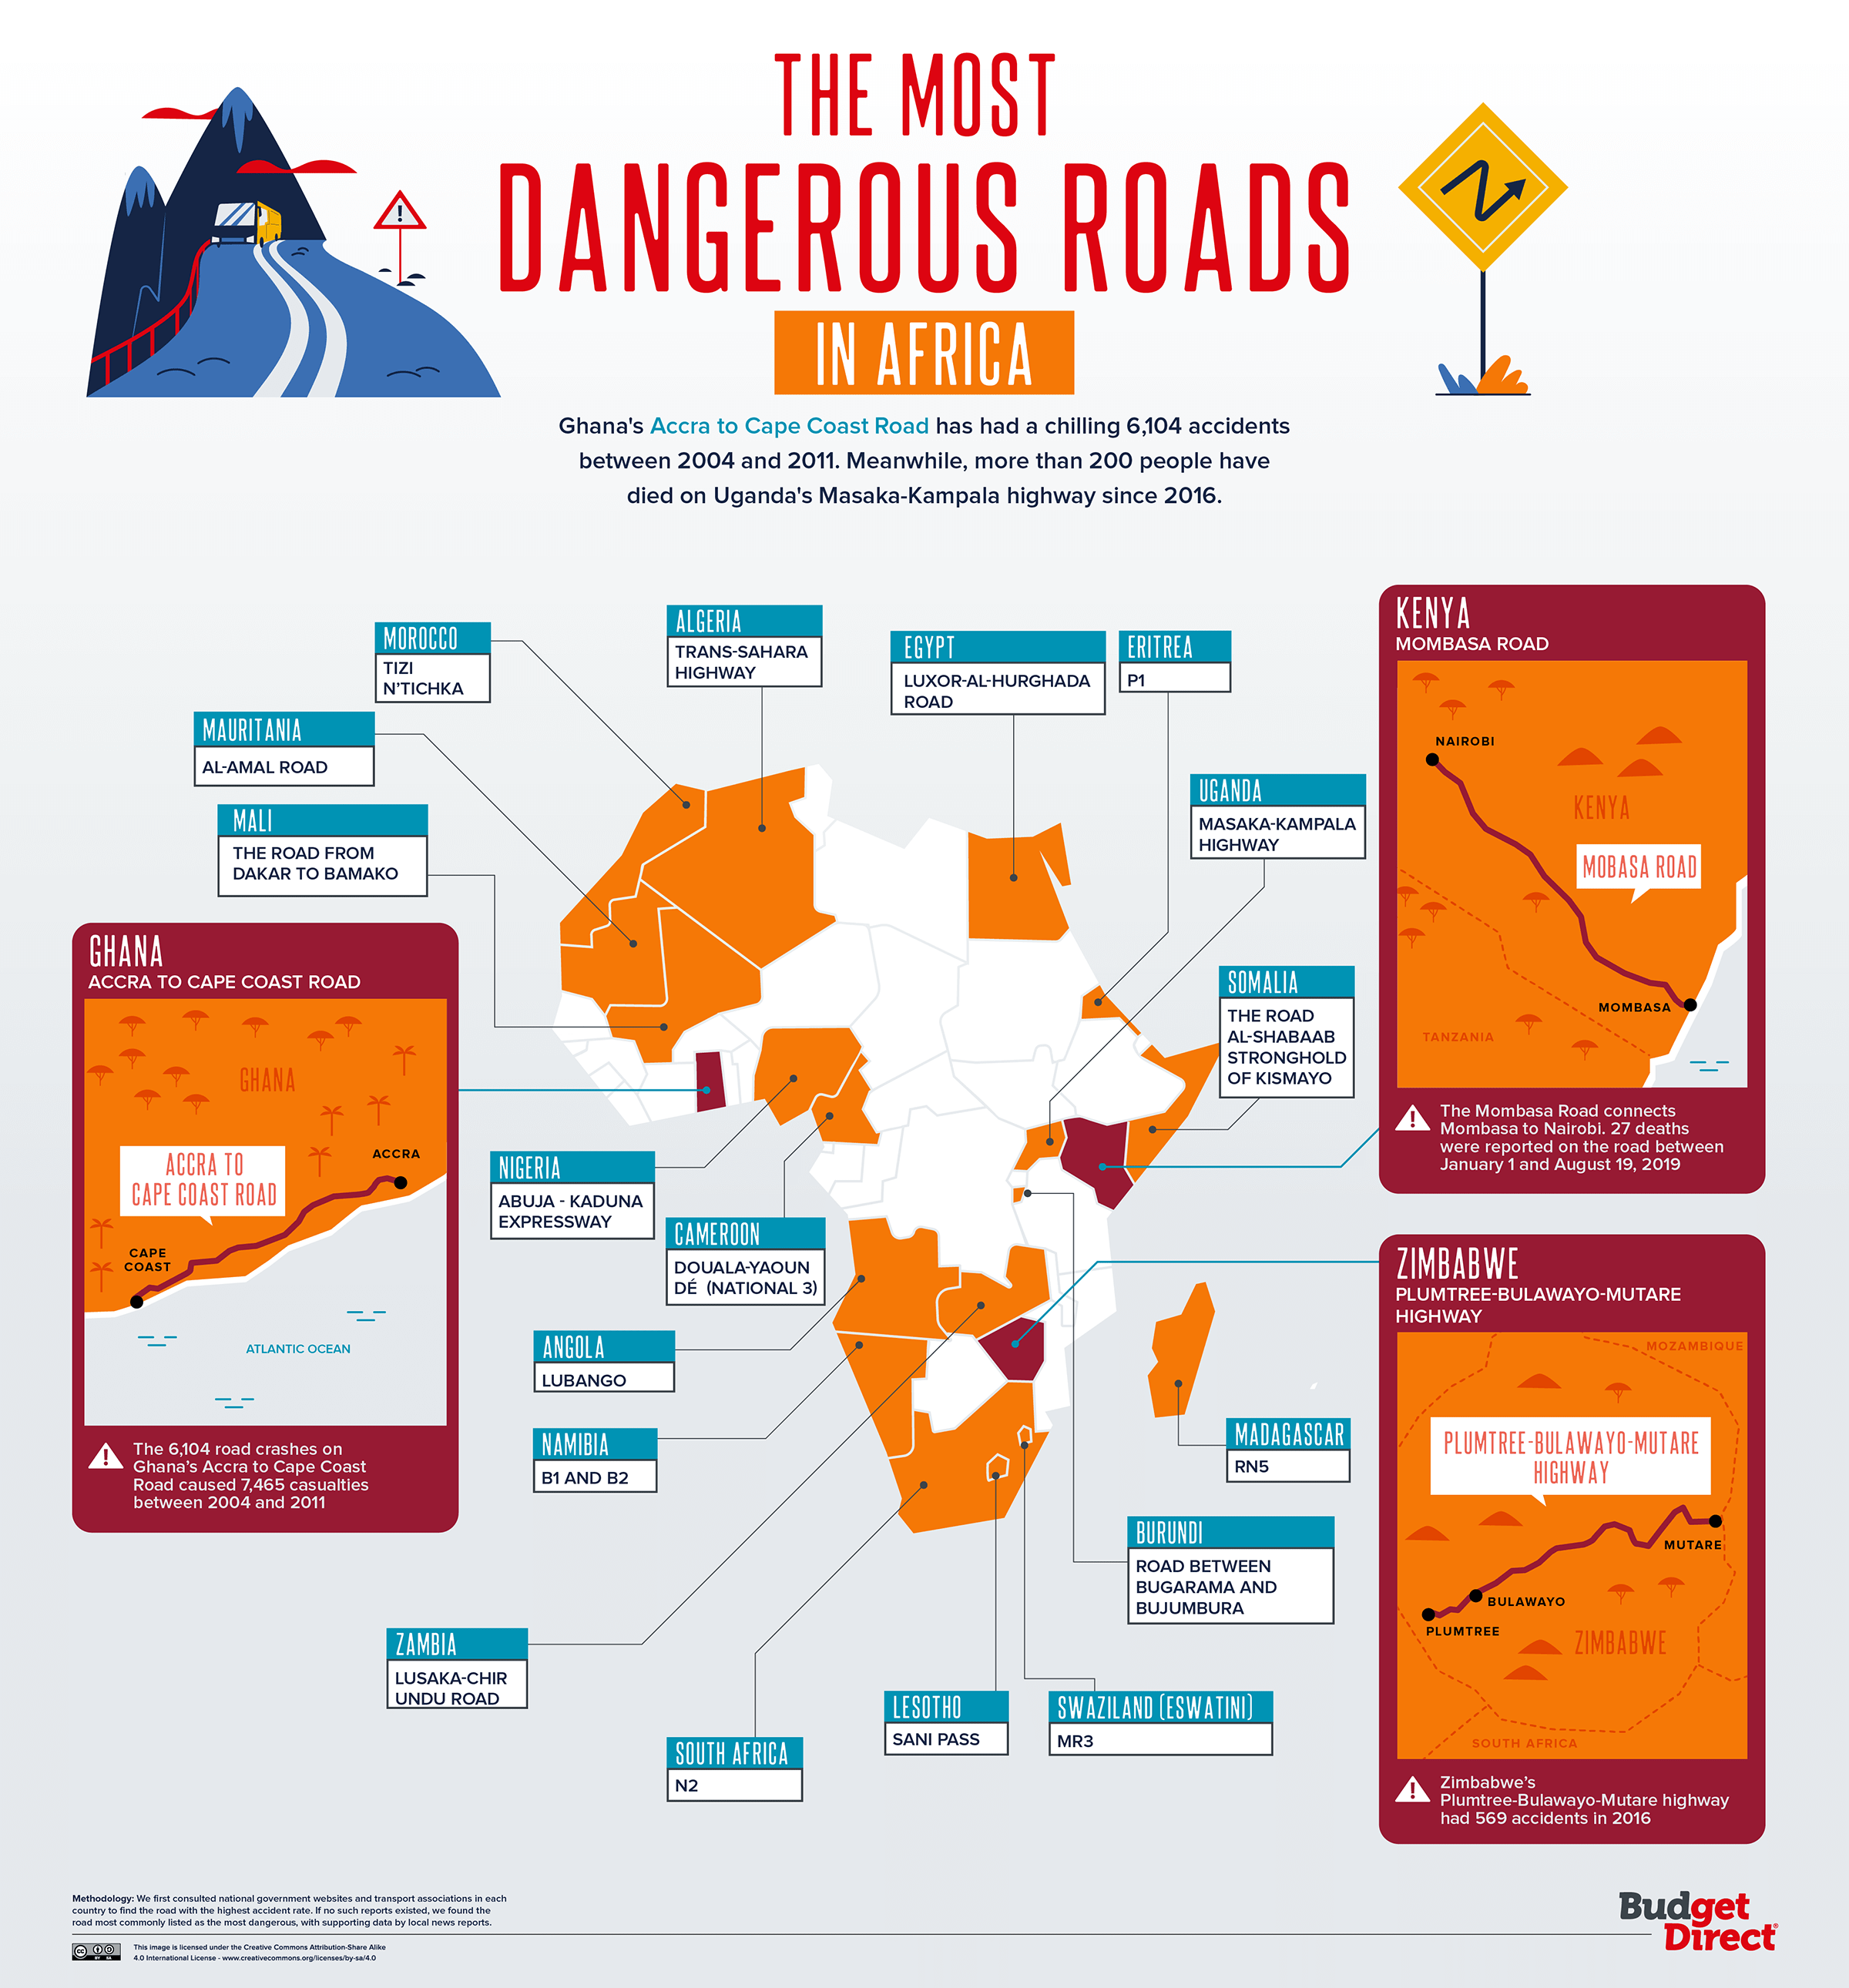 The most dangerous roads in Africa